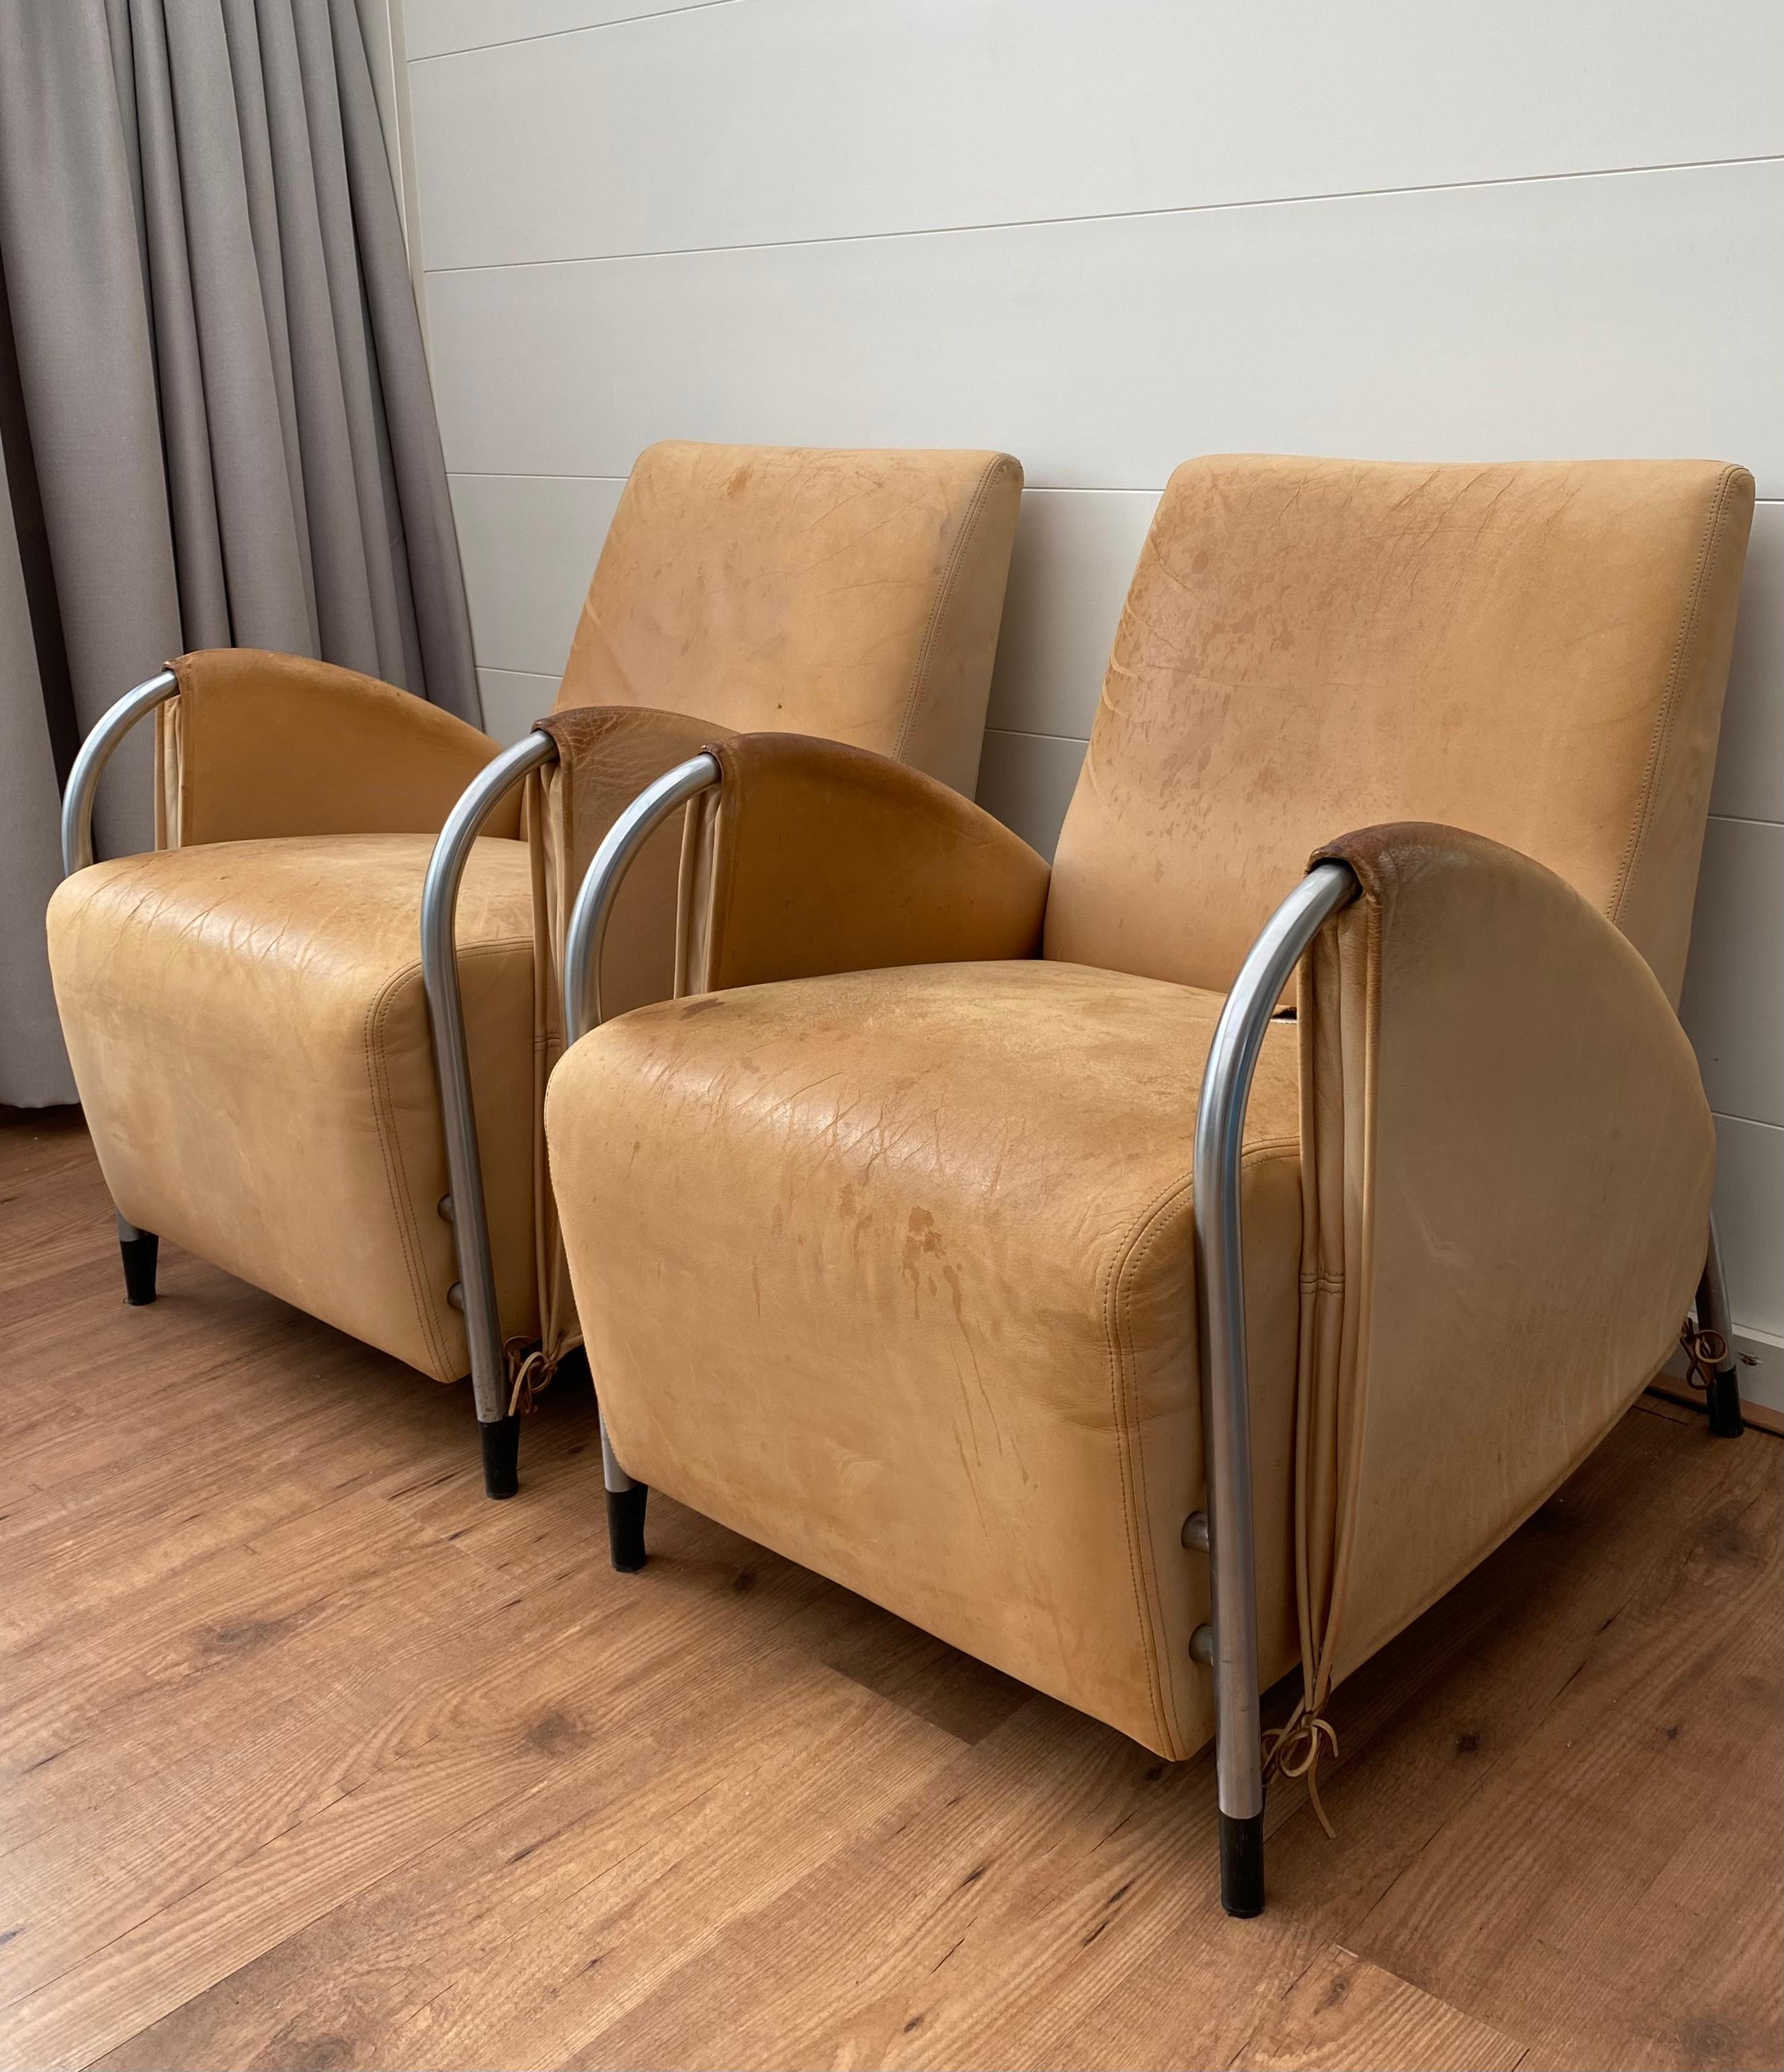 Pair of rare and highly desirable armchairs designed by Jan des Bouvrie for Gelderland. The chairs feature a tubular base with black accents and are upholstered in thick leather. Both chairs need to be reupholstered while the leather shows stains,